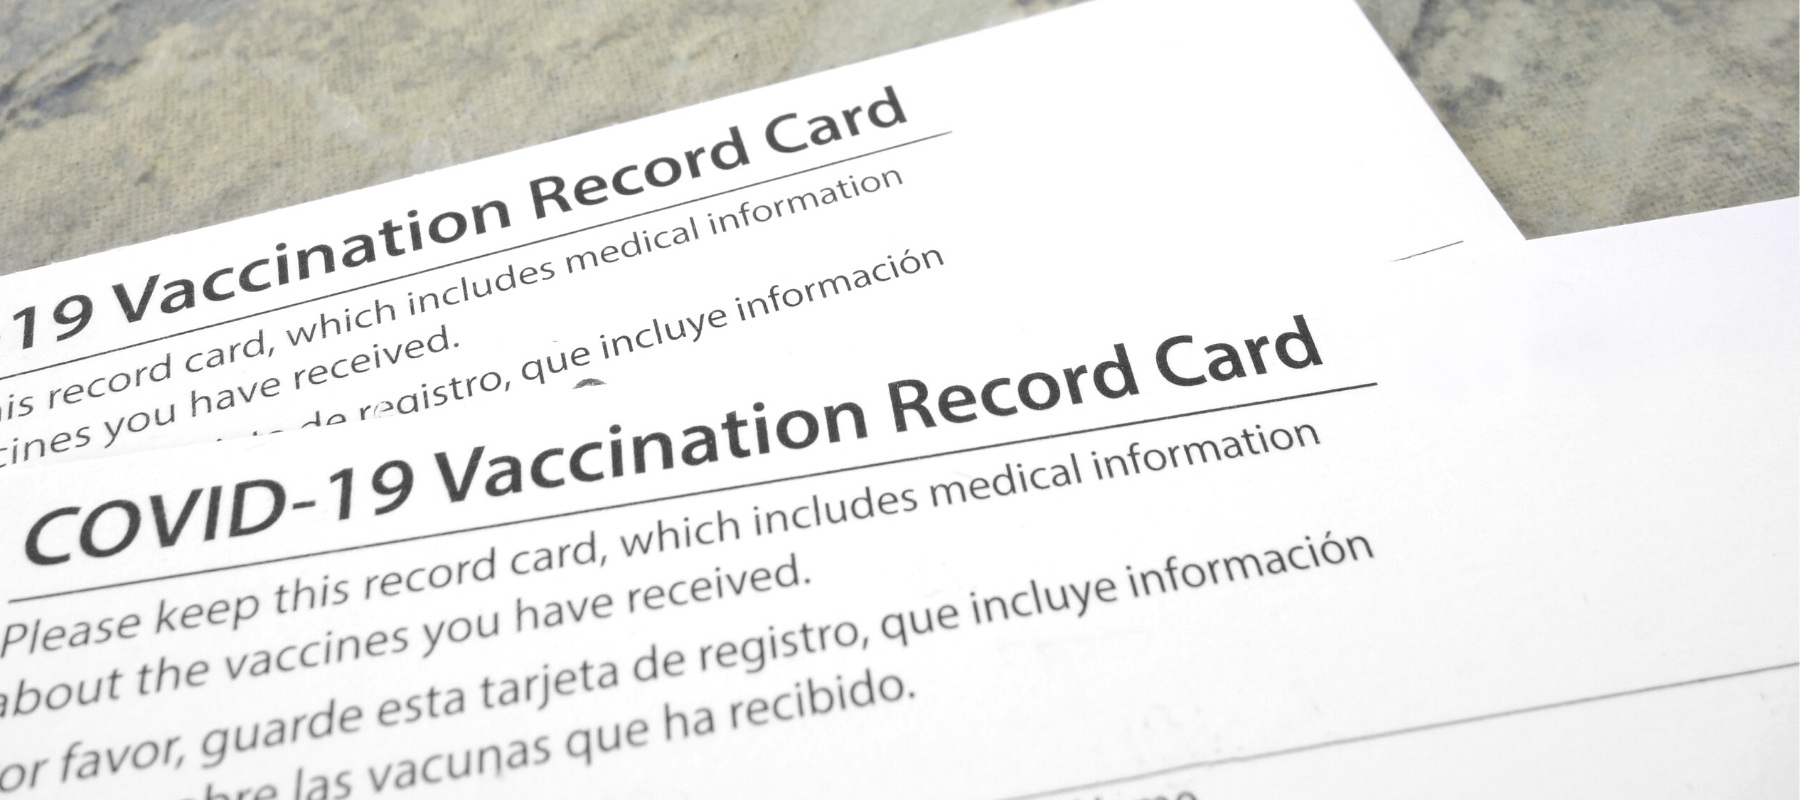 COVID-19 Vaccination Record Cards serving as proof of a COVID-19 Vaccination